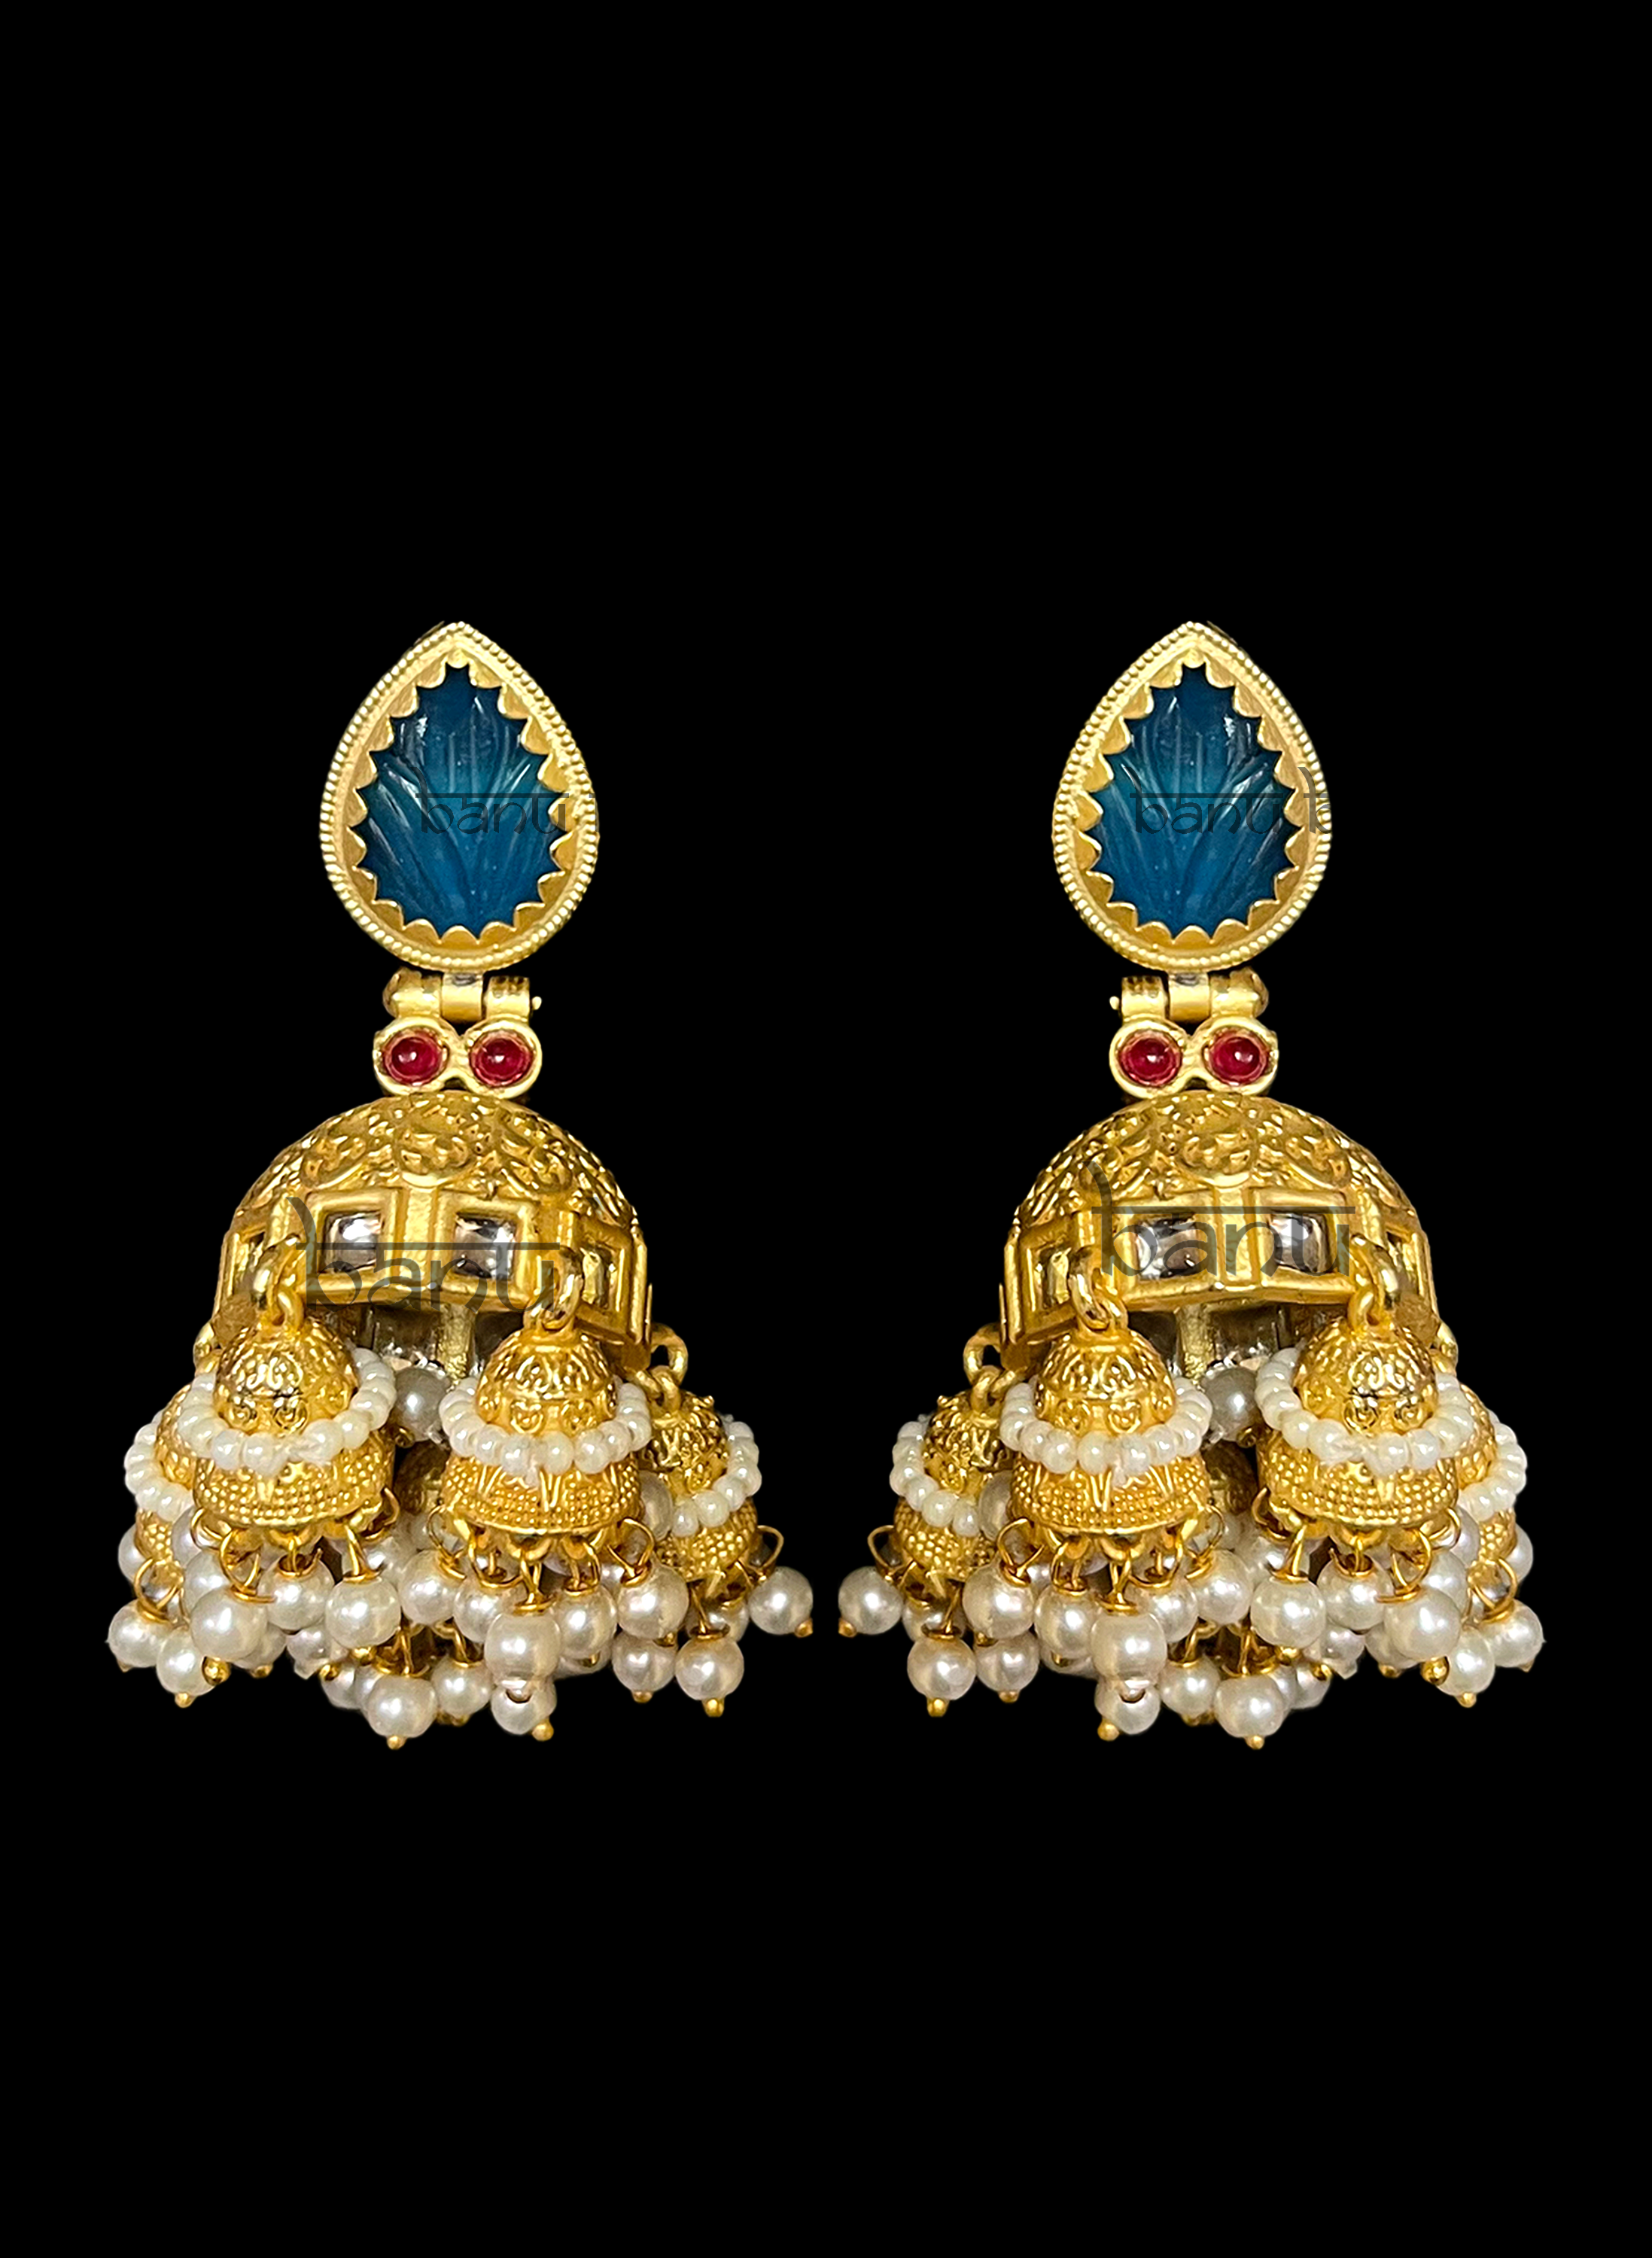 Amrapalli royal blue temple jewelry - Indian traditional earrings